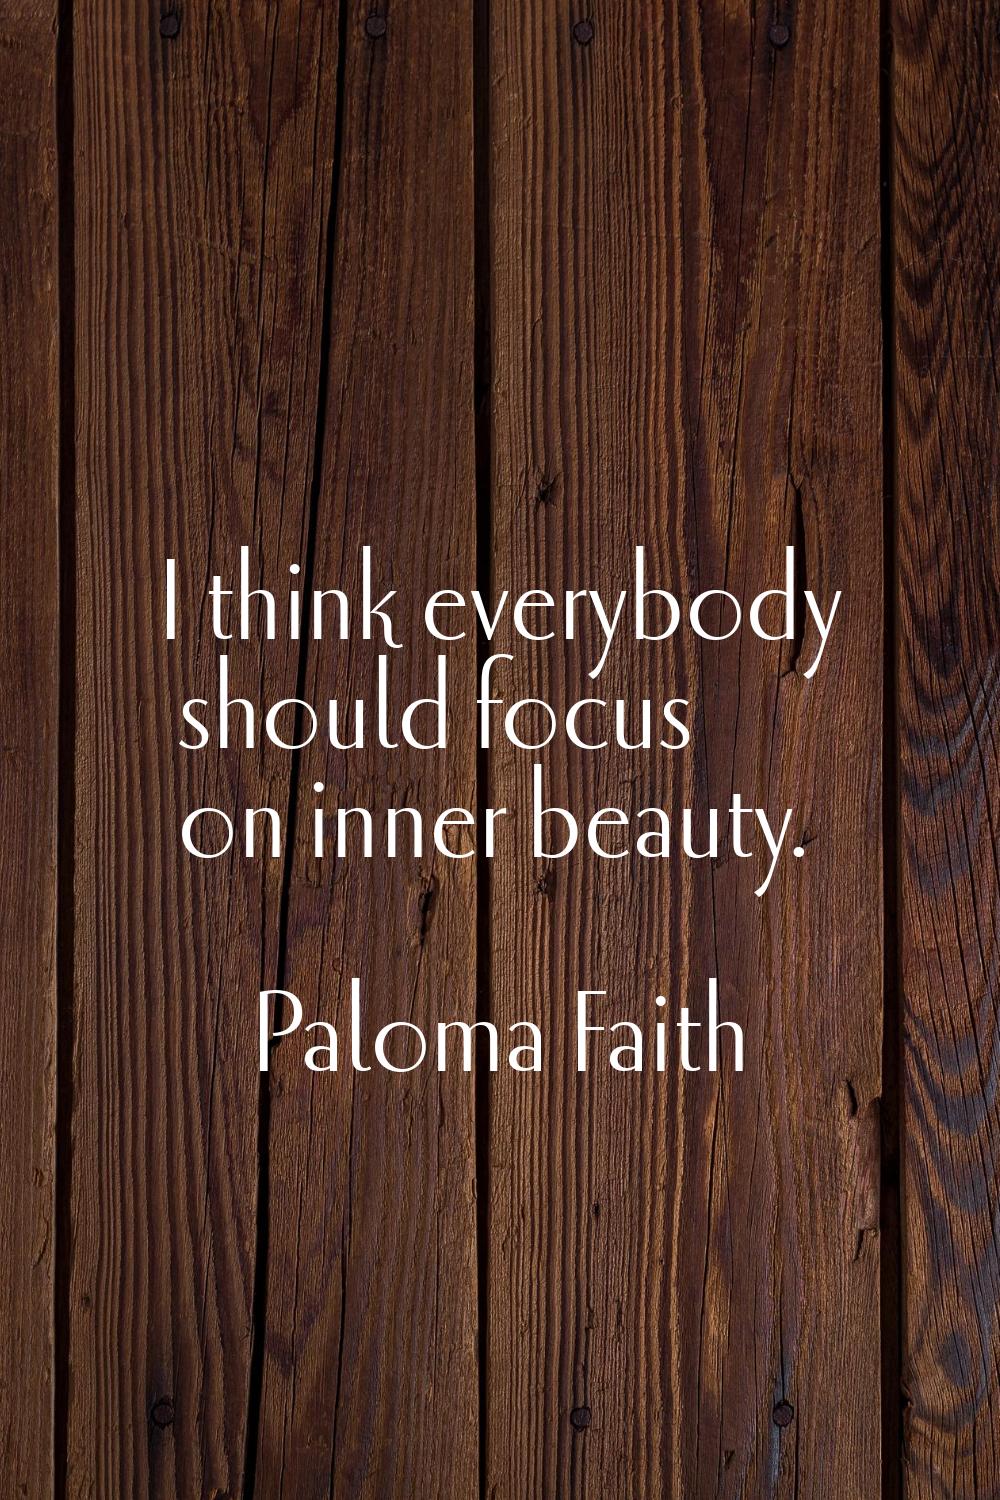 I think everybody should focus on inner beauty.